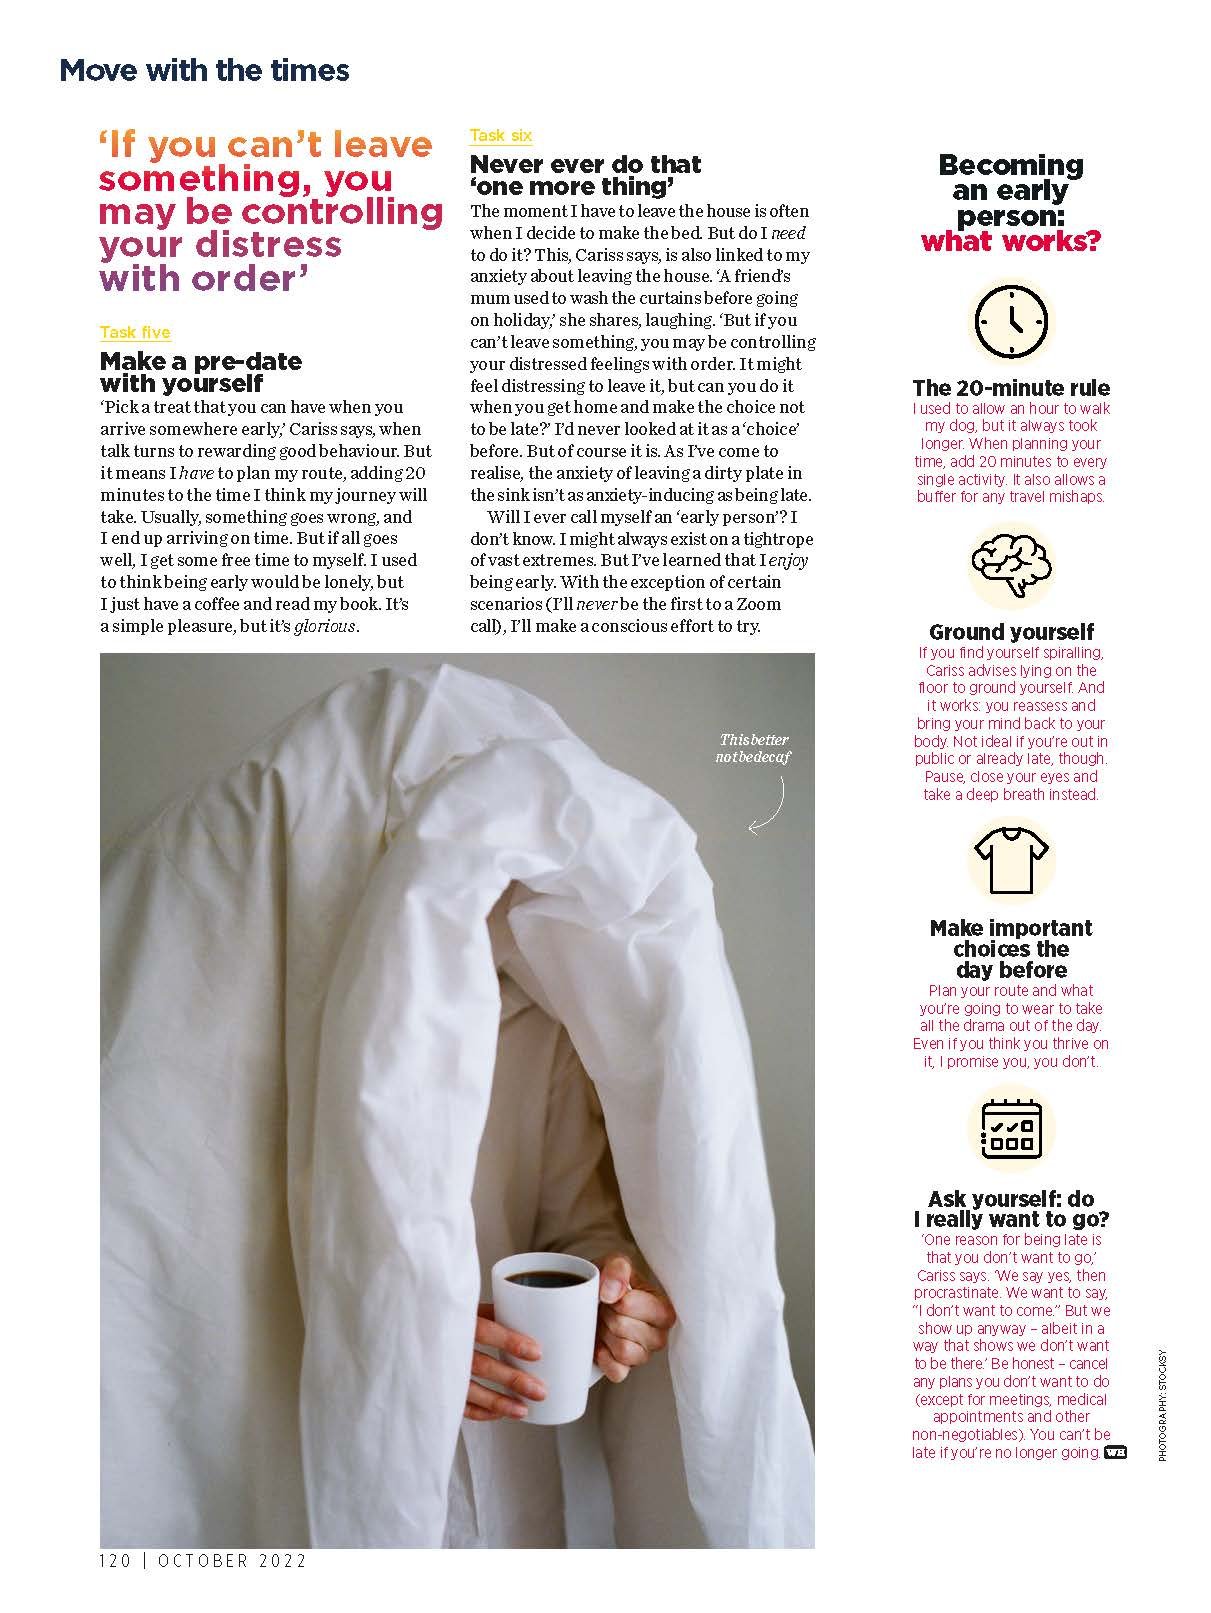 WH Oct_ FEATURE Can I Become An Early Person_ (Cosmo UK June_July)_pdf_spread_Page_3.jpg